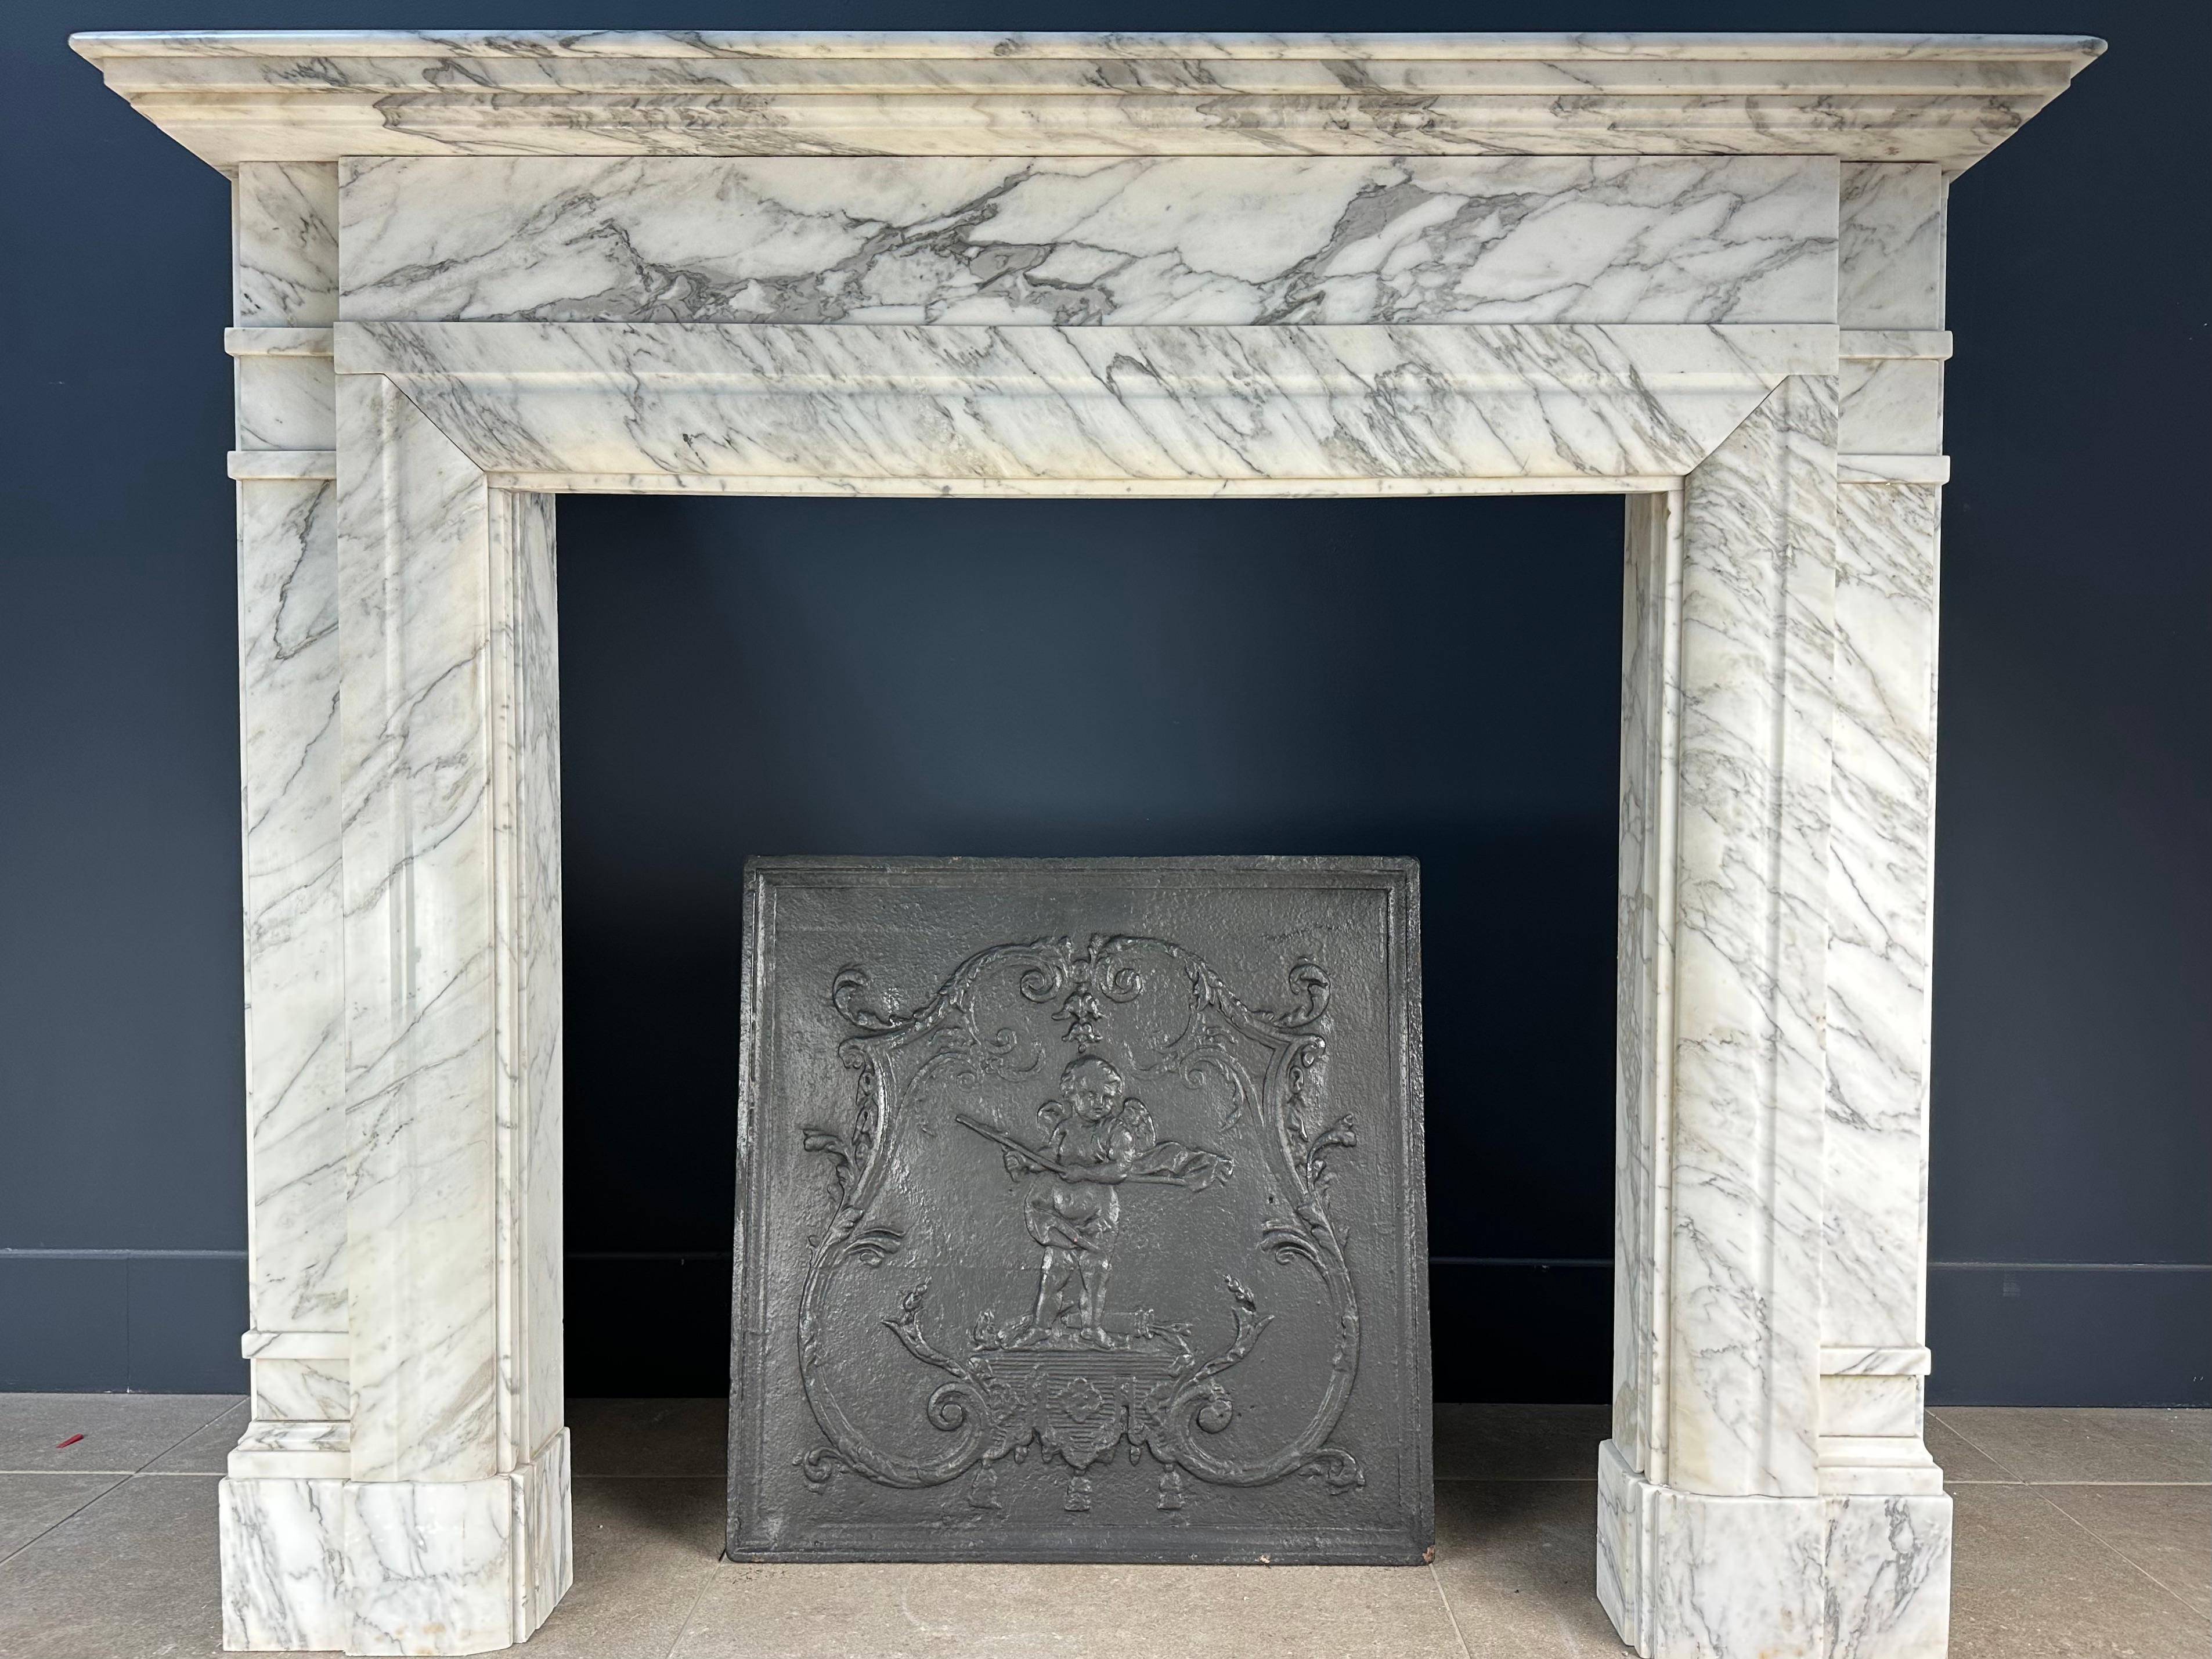 Beautiful large antique cast iron fireback. Due to its size, this fireback has a luxurious look. The fireback can be placed in a working fireplace against the fire wall or placed as a style item in an antique fireplace.